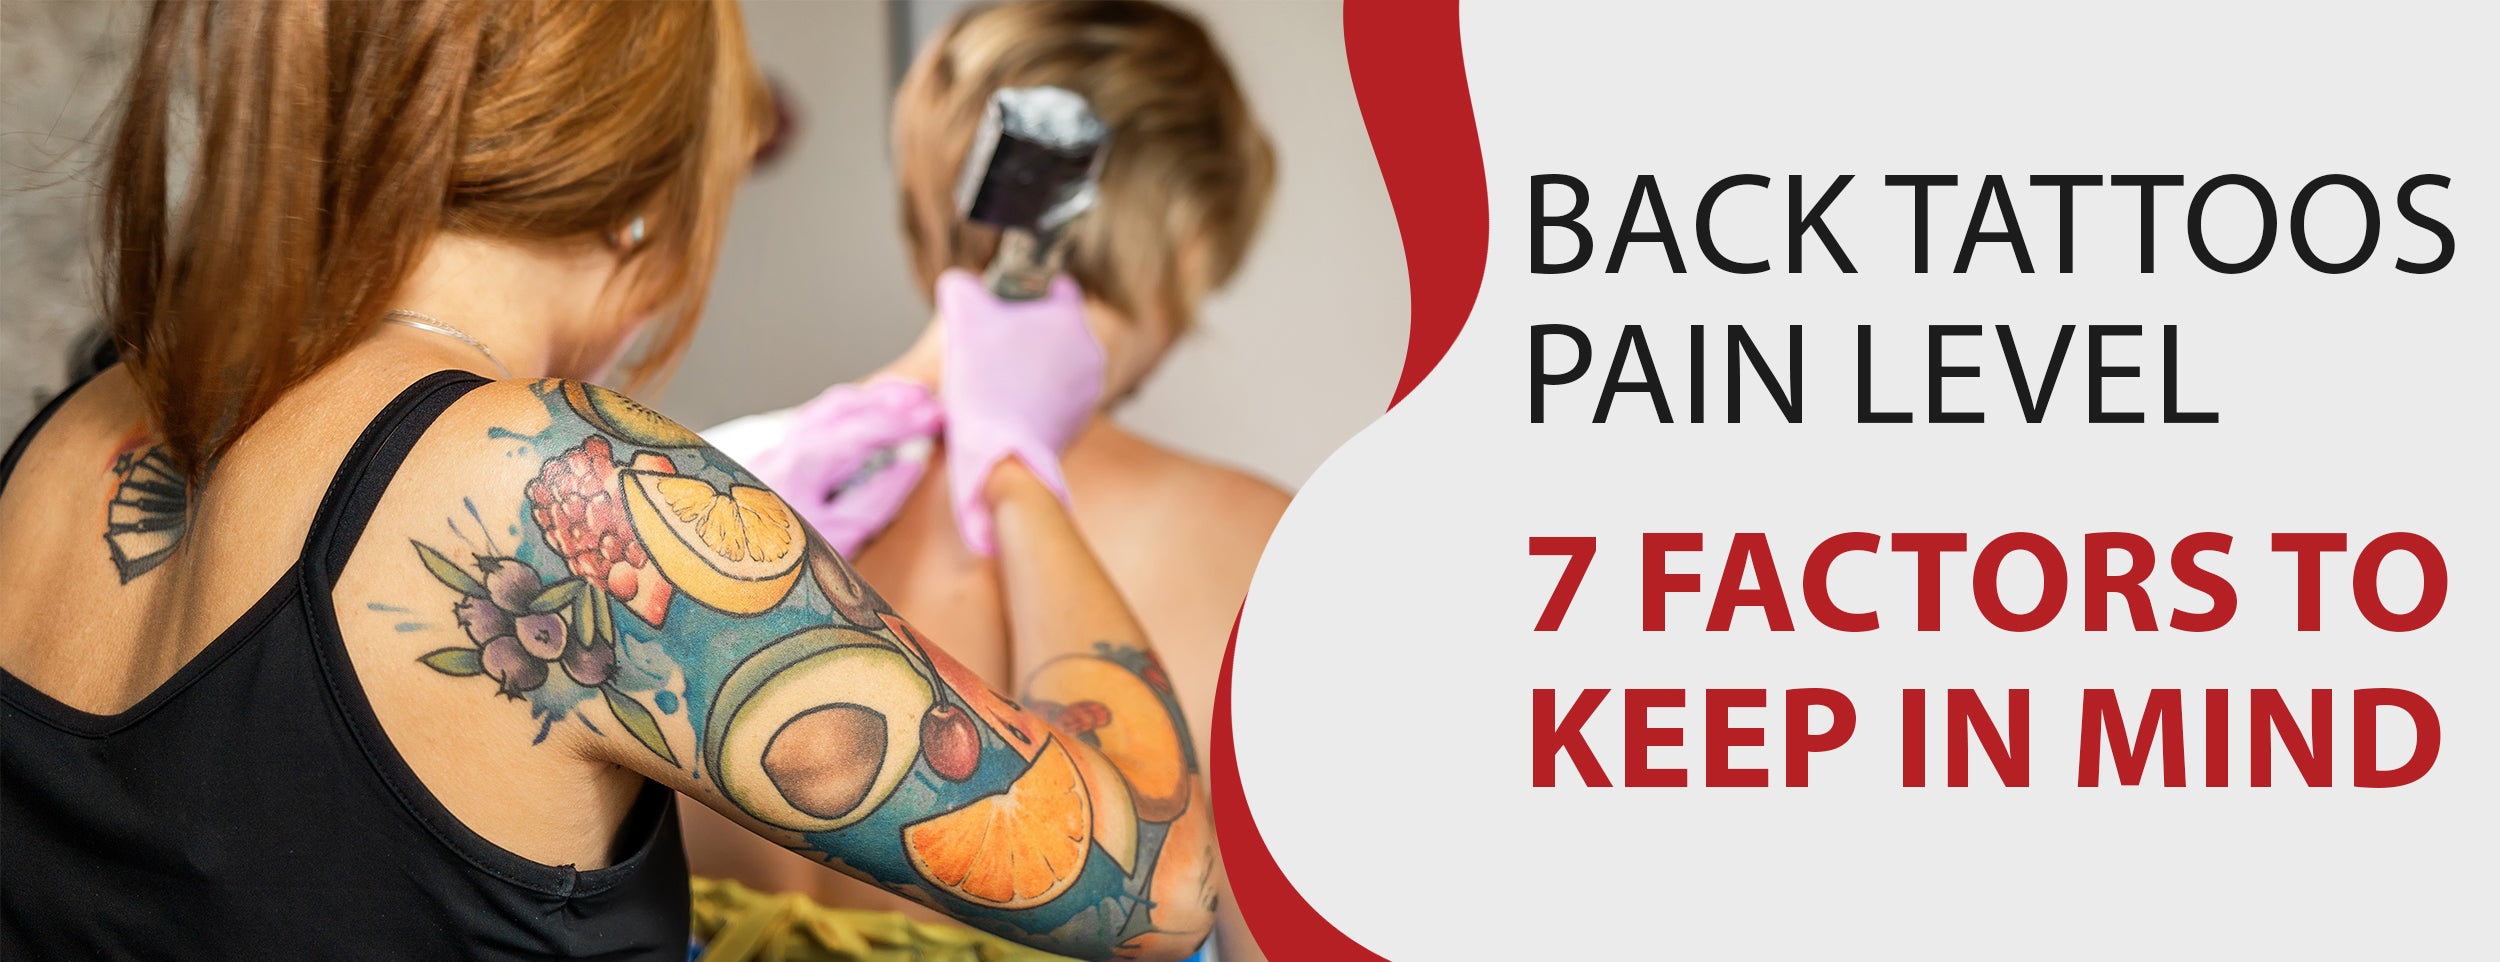 23 Awesome Upper Back Tattoos for Women – SORTRA